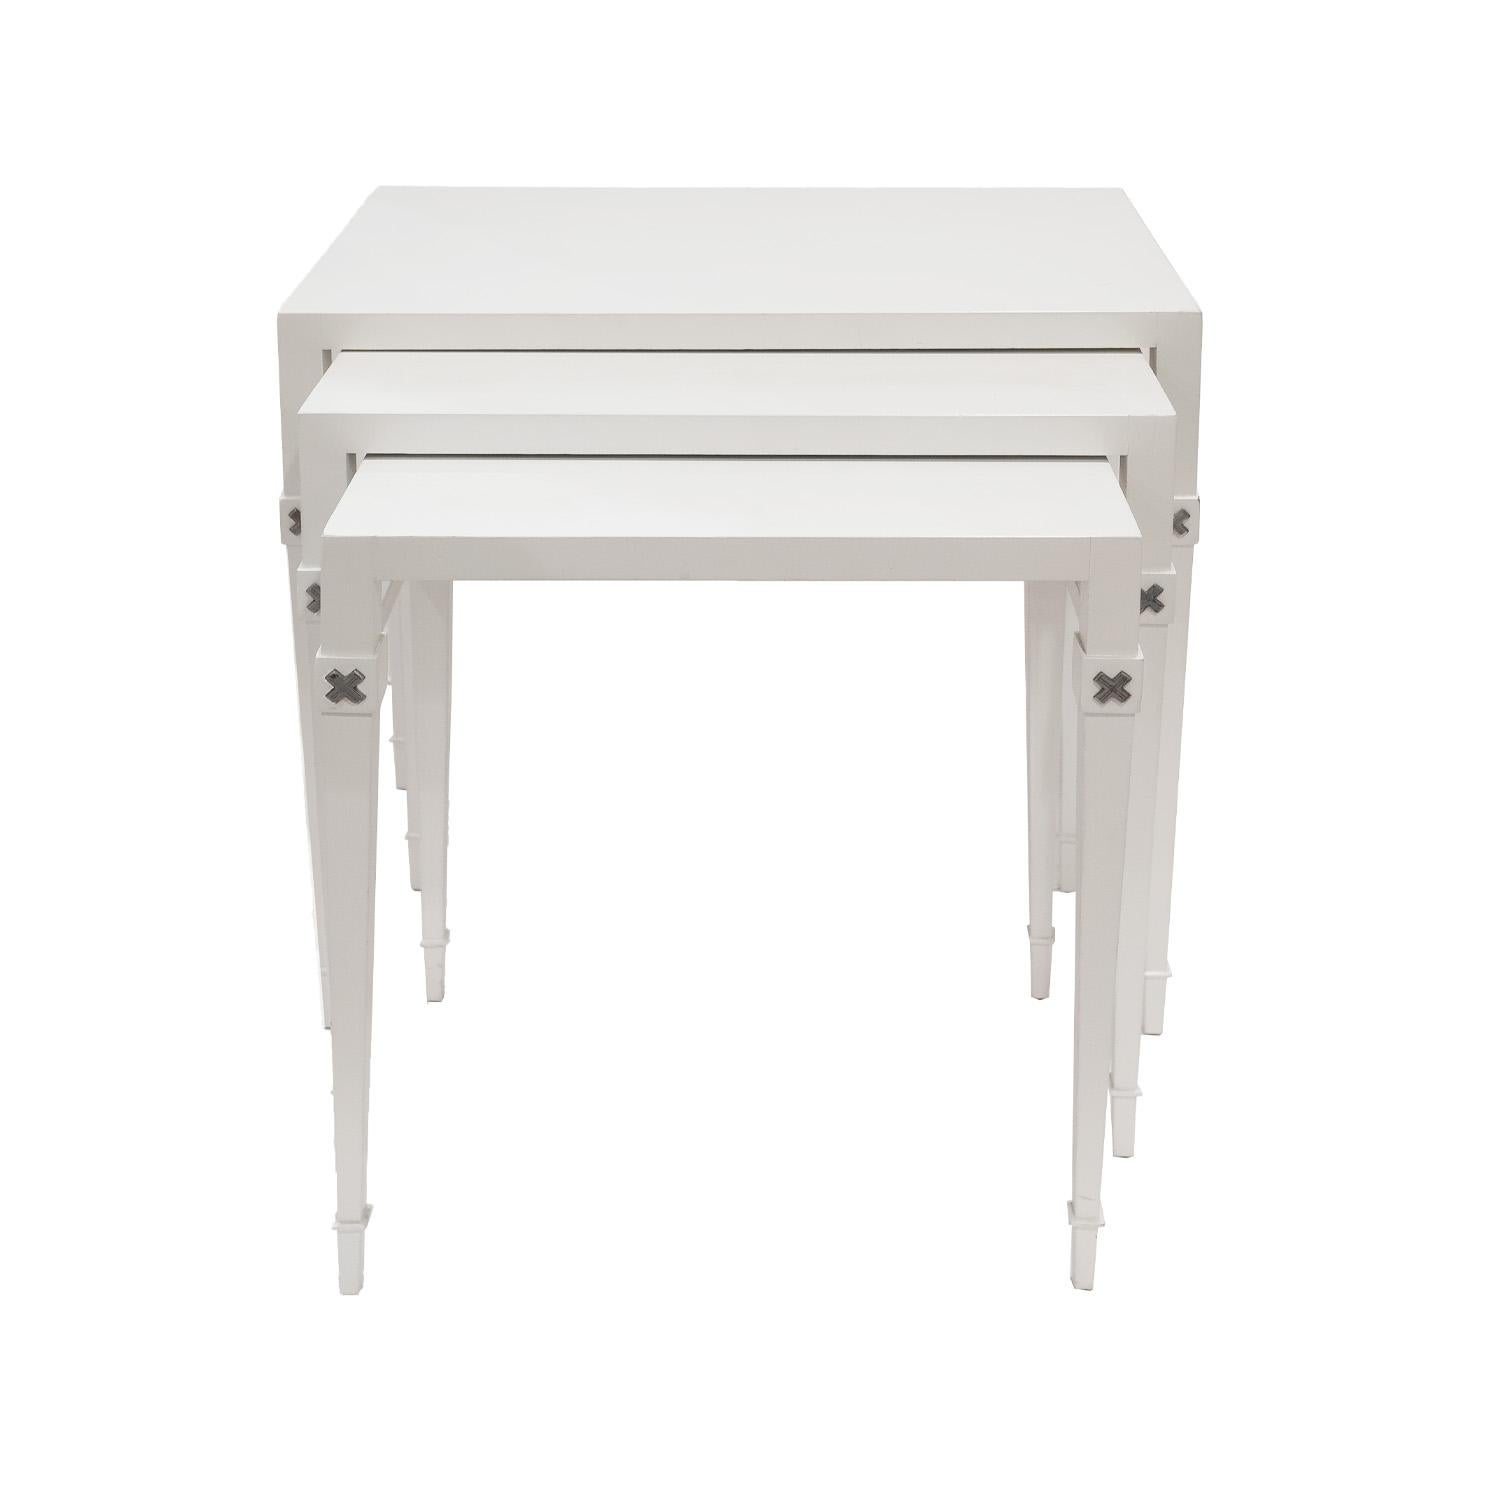 American Tommi Parzinger Rare Set of 3 Nesting Tables in White Lacquer 1940s, 'Signed' For Sale